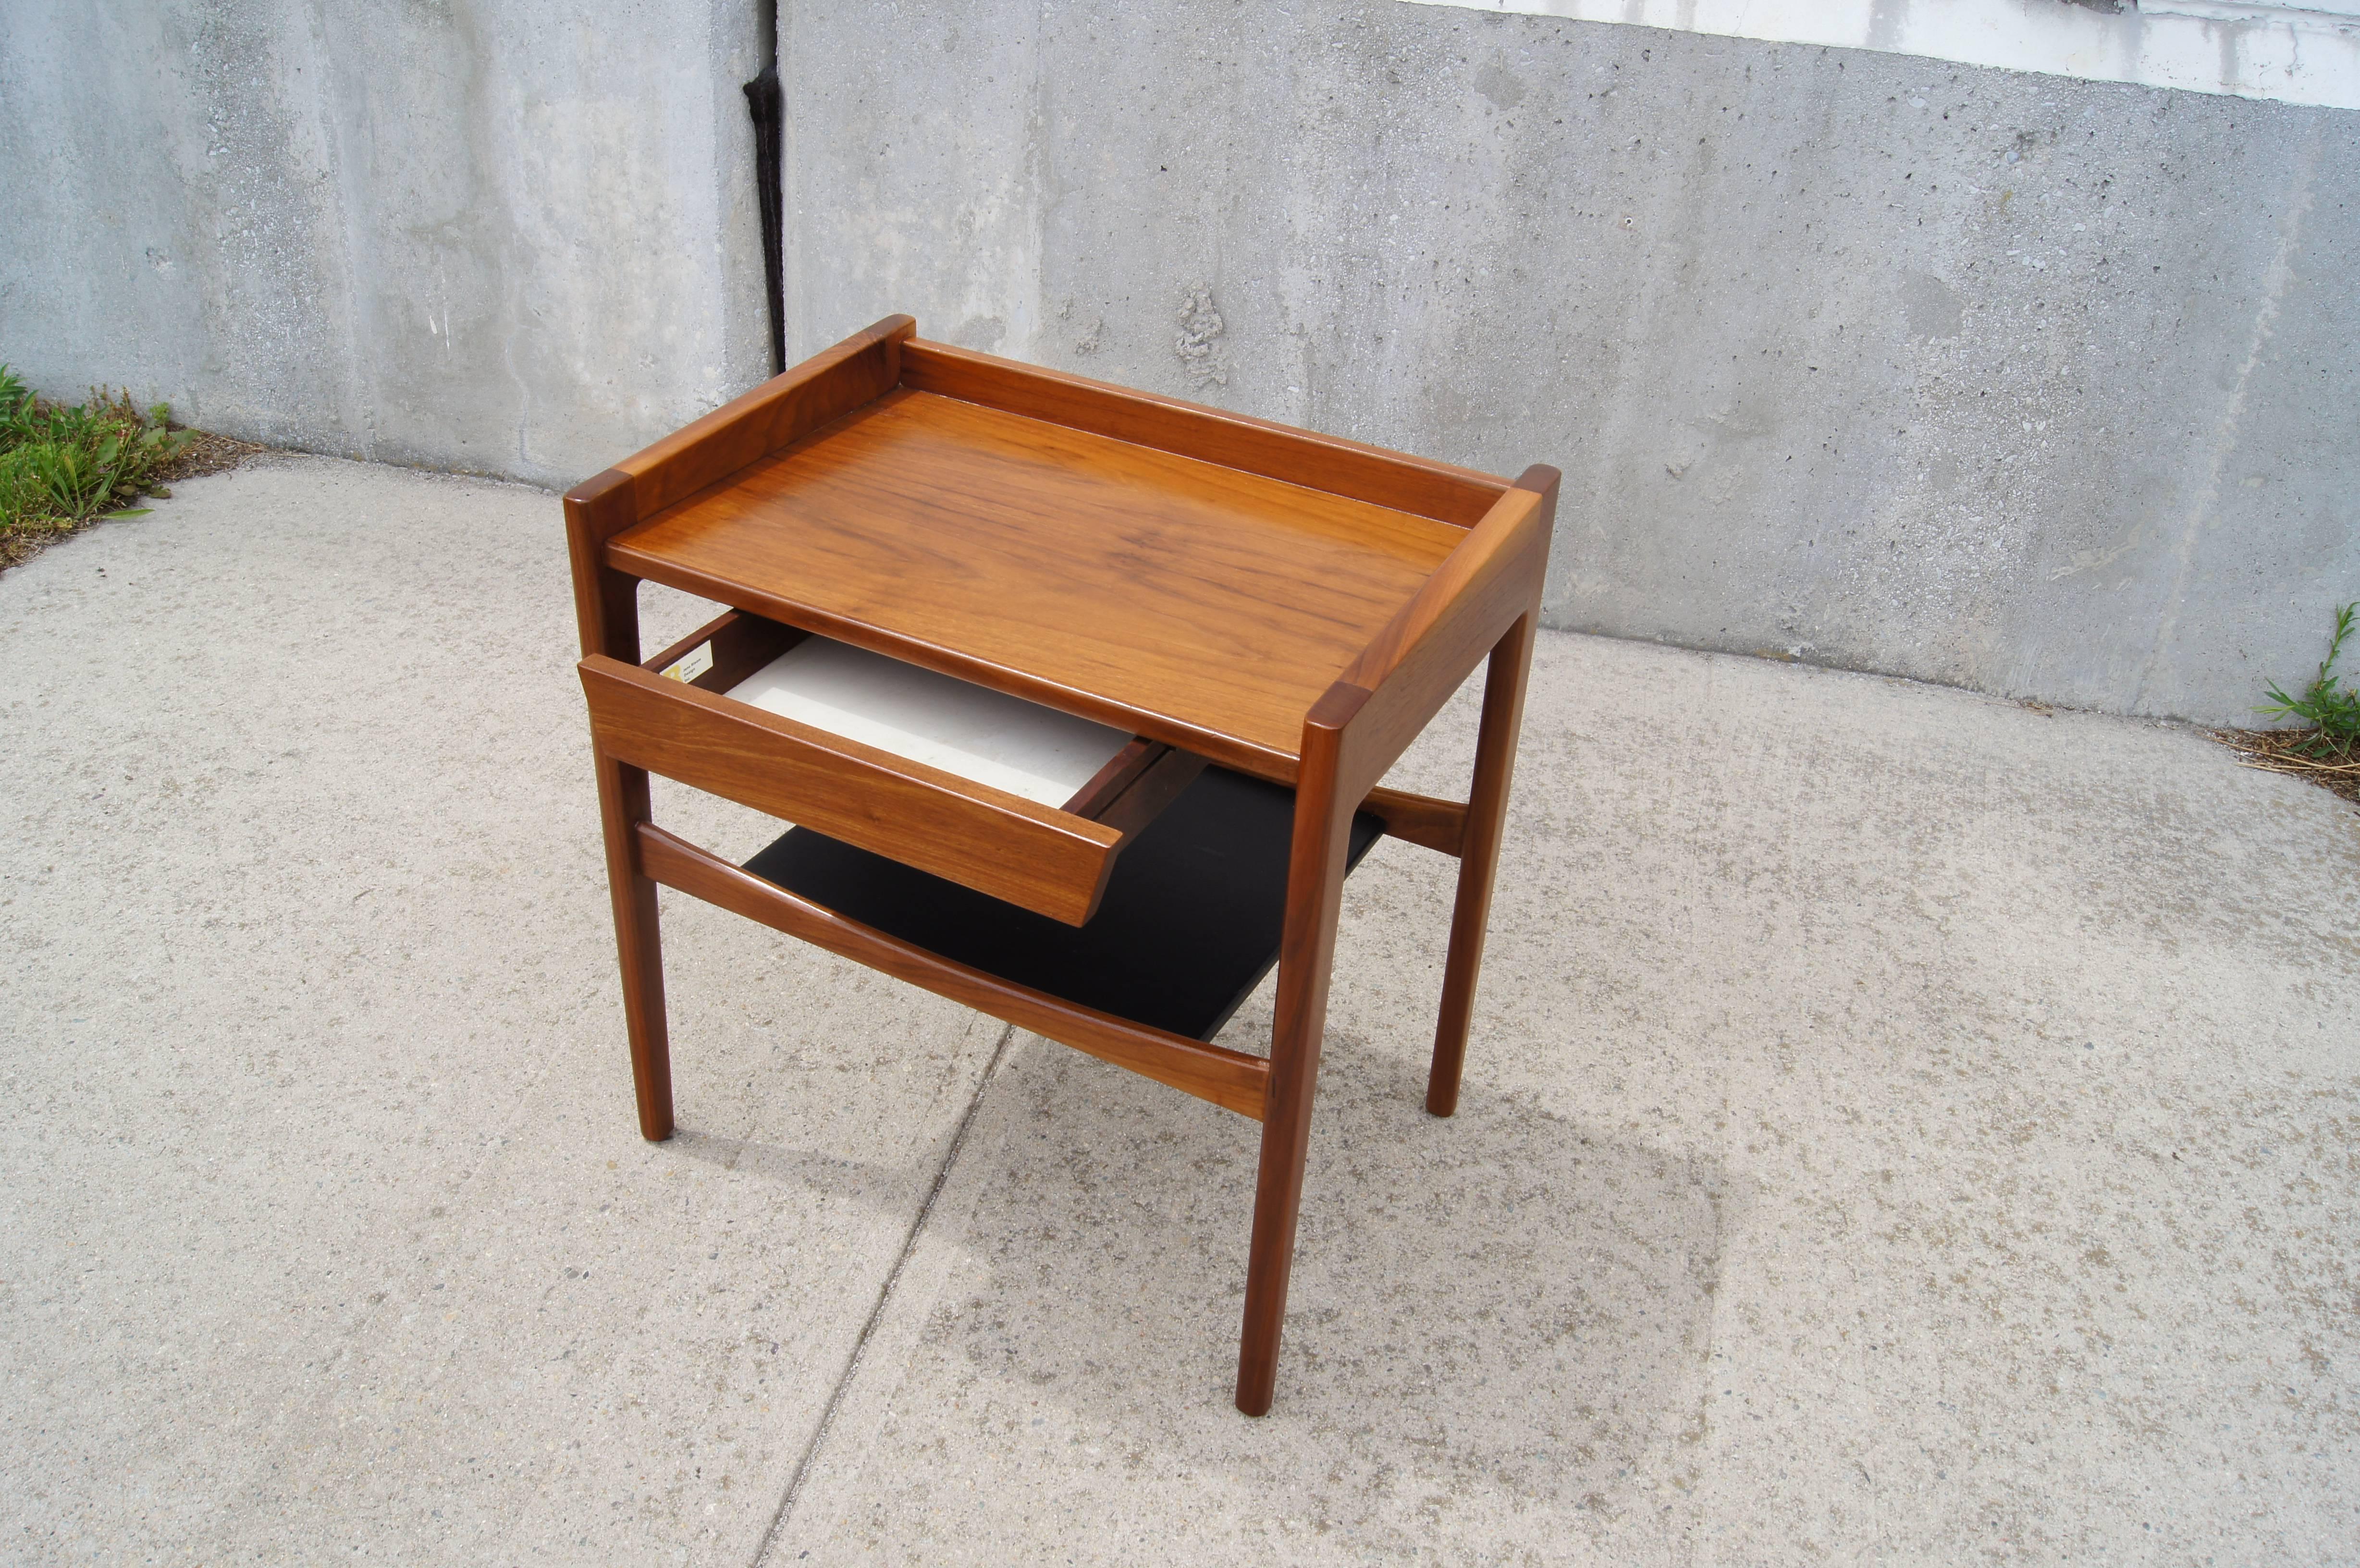 Jens Risom designed this distinctive walnut side table with a raised gallery on three sides, a single suspended drawer and a low shelf covered in black leather. A rarely seen piece with great charm.